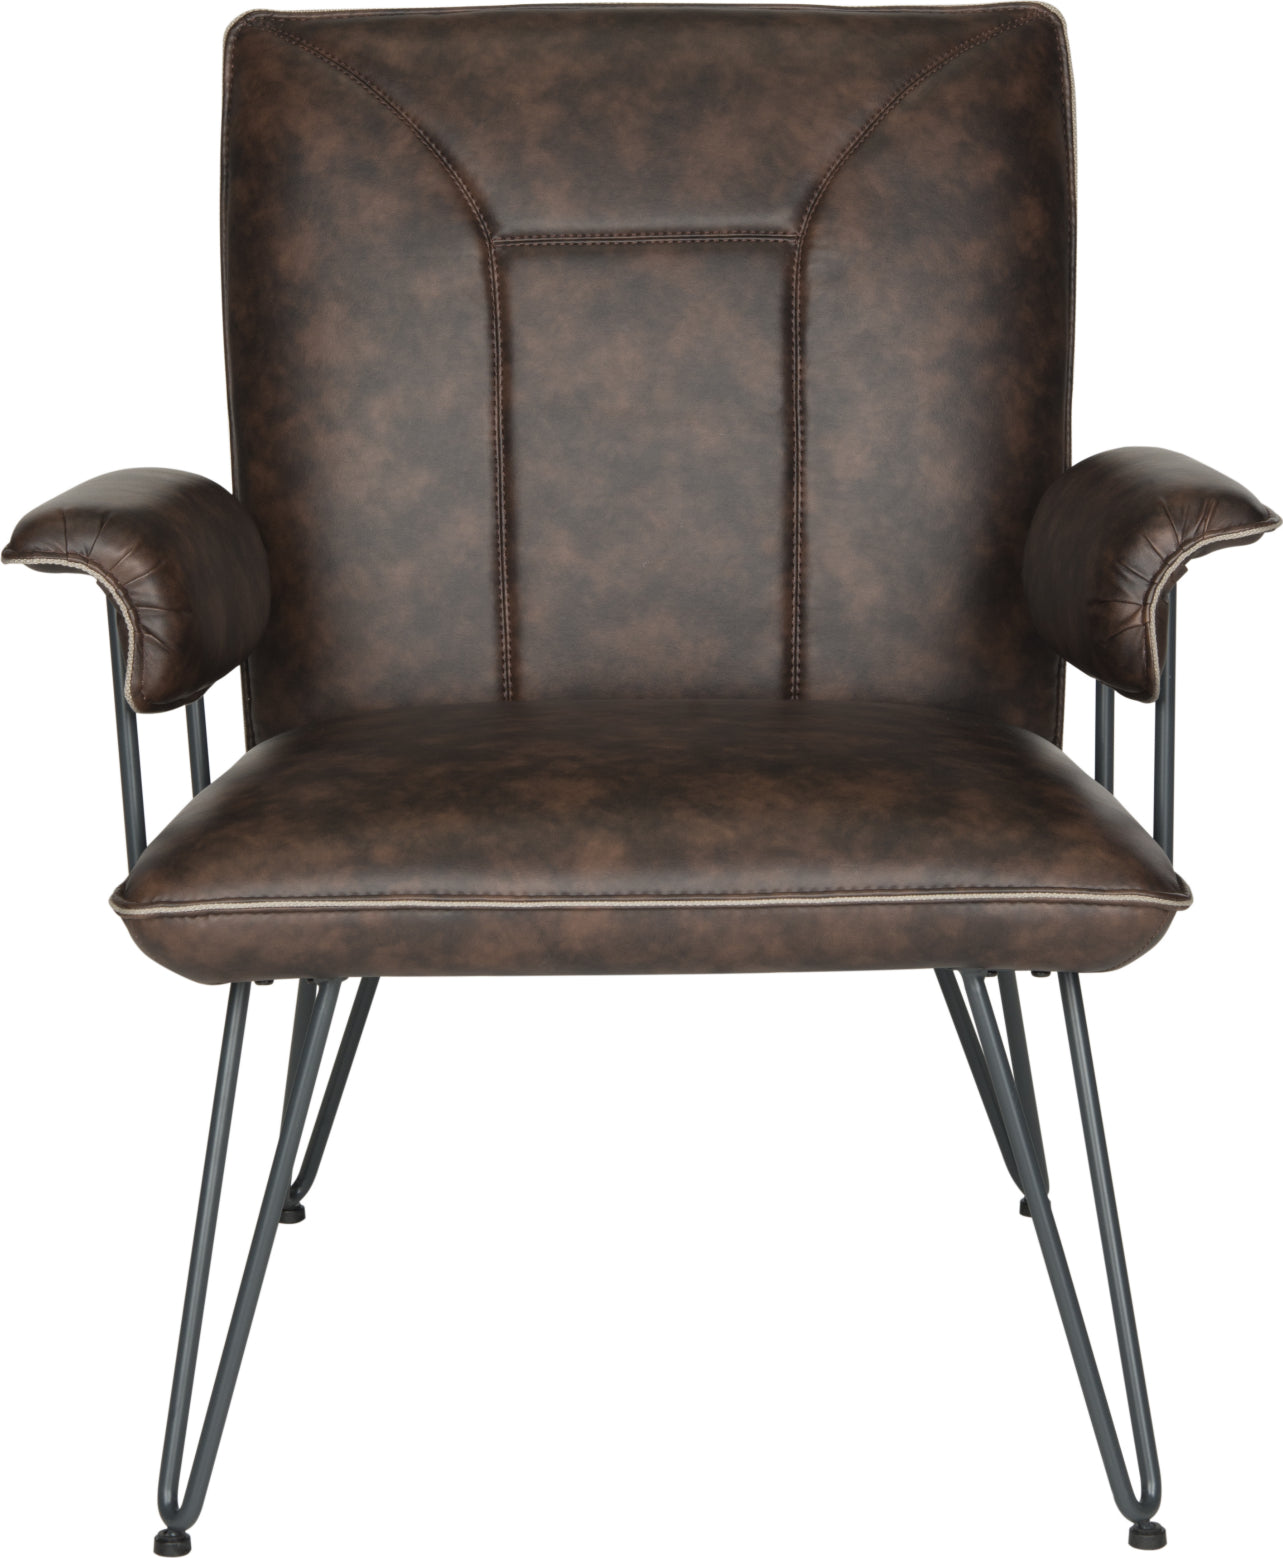 Safavieh Johannes 173''H Mid Century Modern Leather Arm Chair Antique Brown and Black Furniture main image